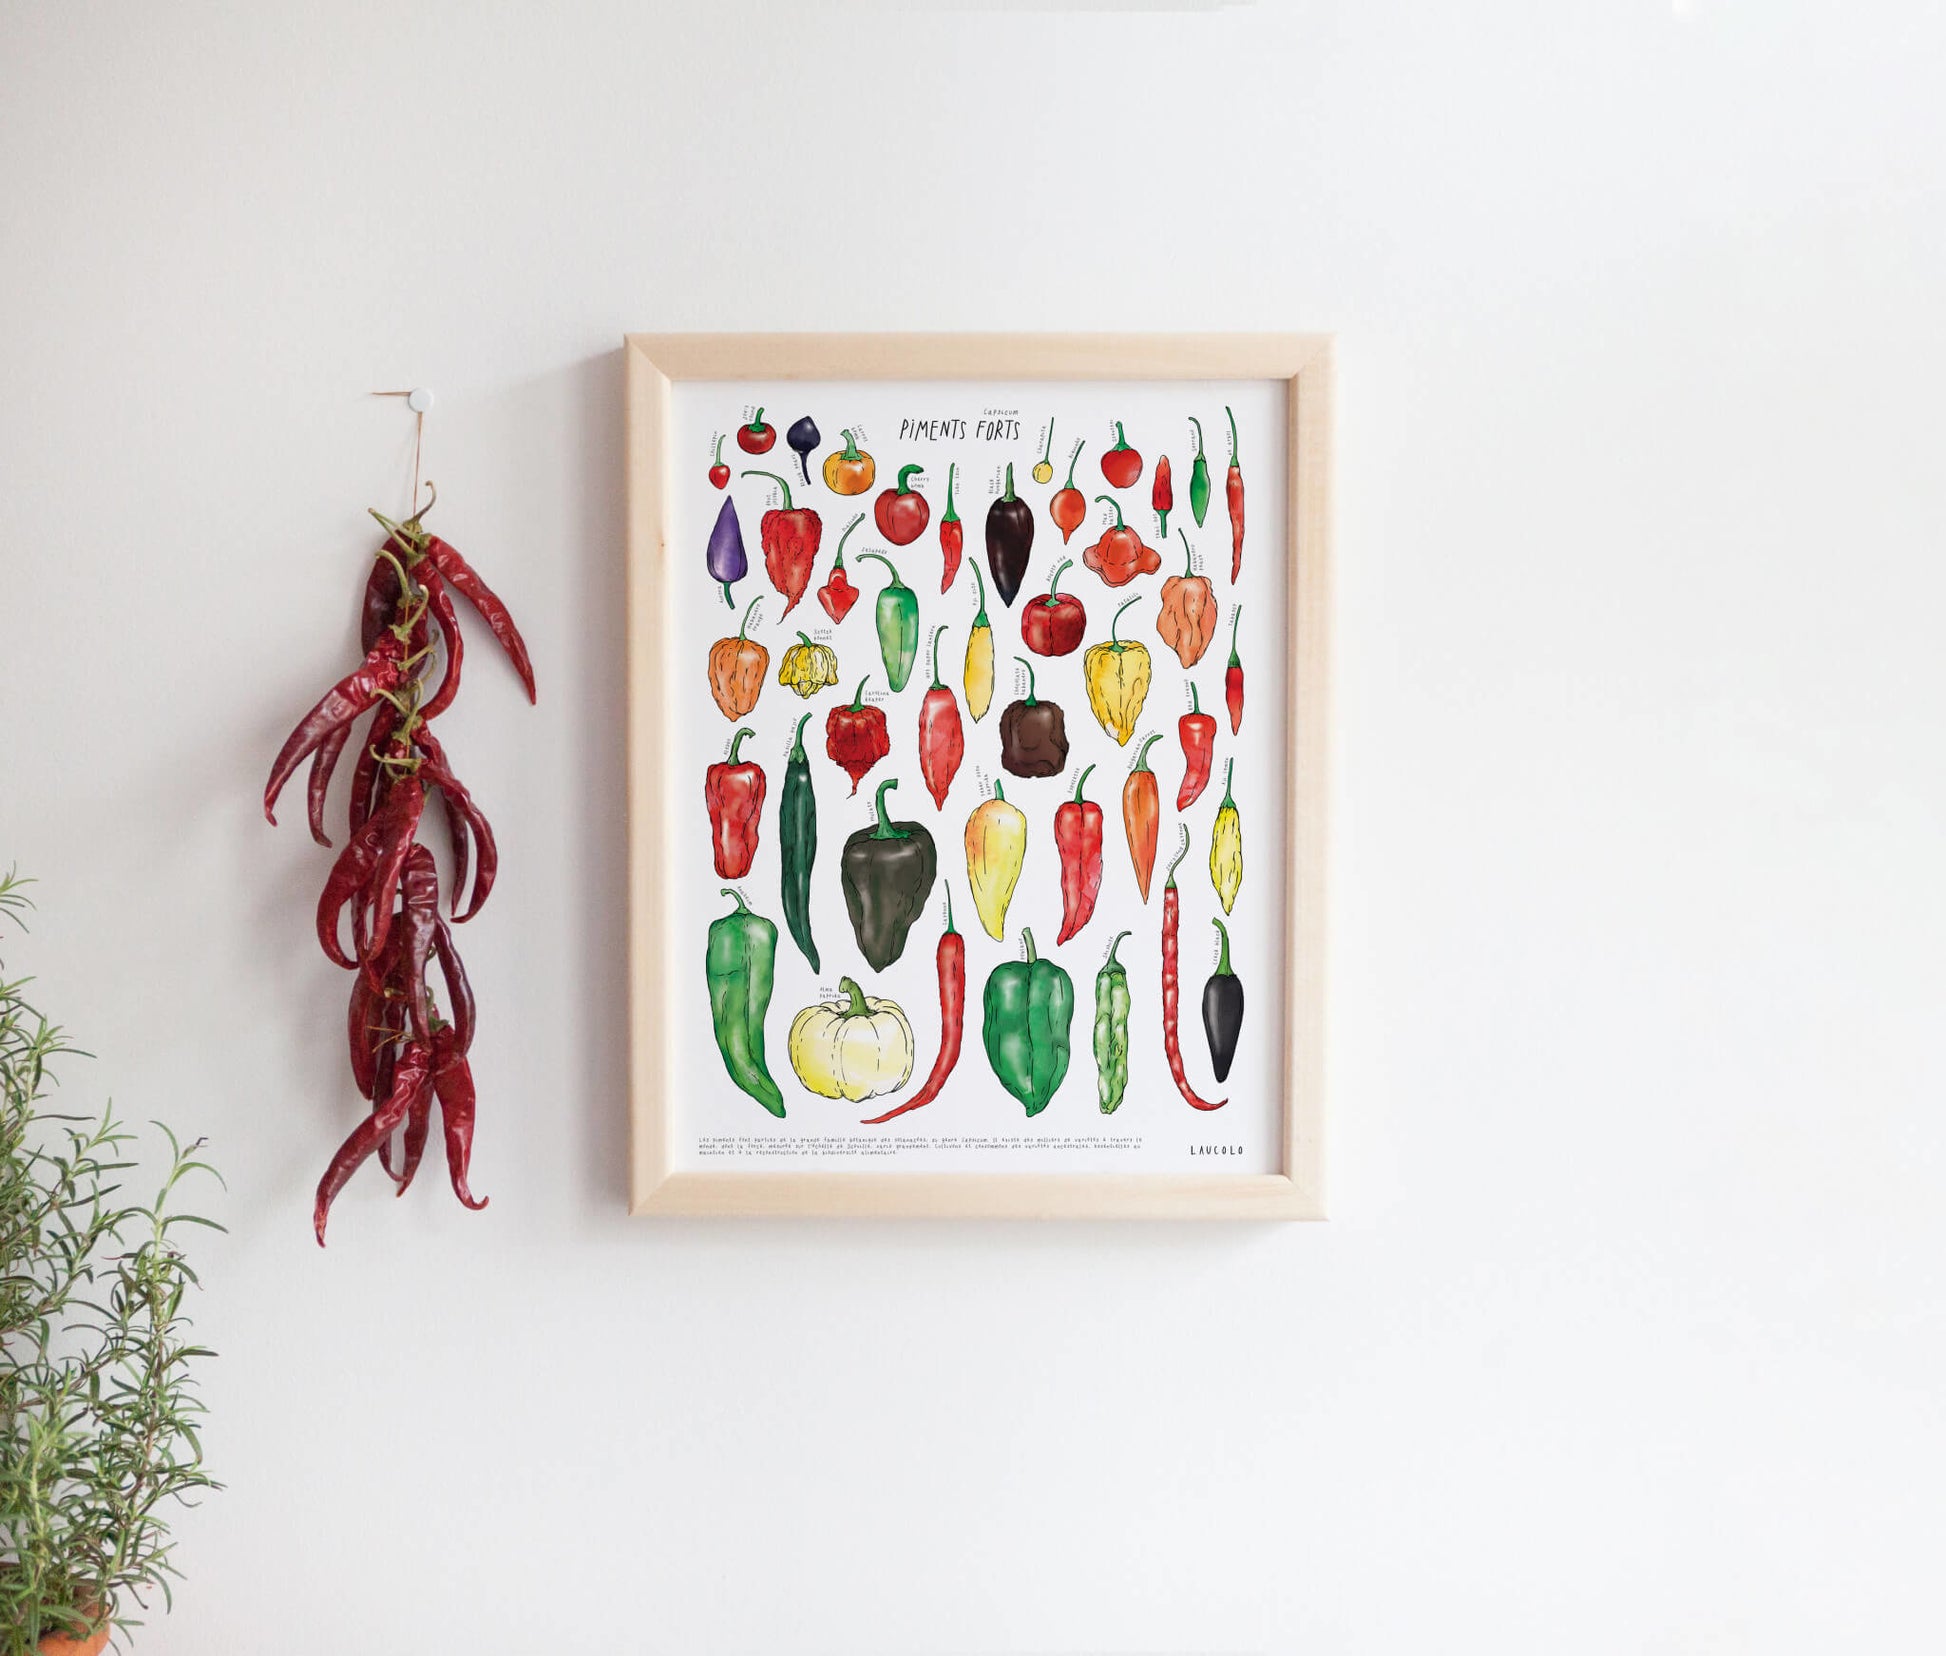 Chili pepper illustration poster in wood frame on white wall next to dried red chili pepper braid